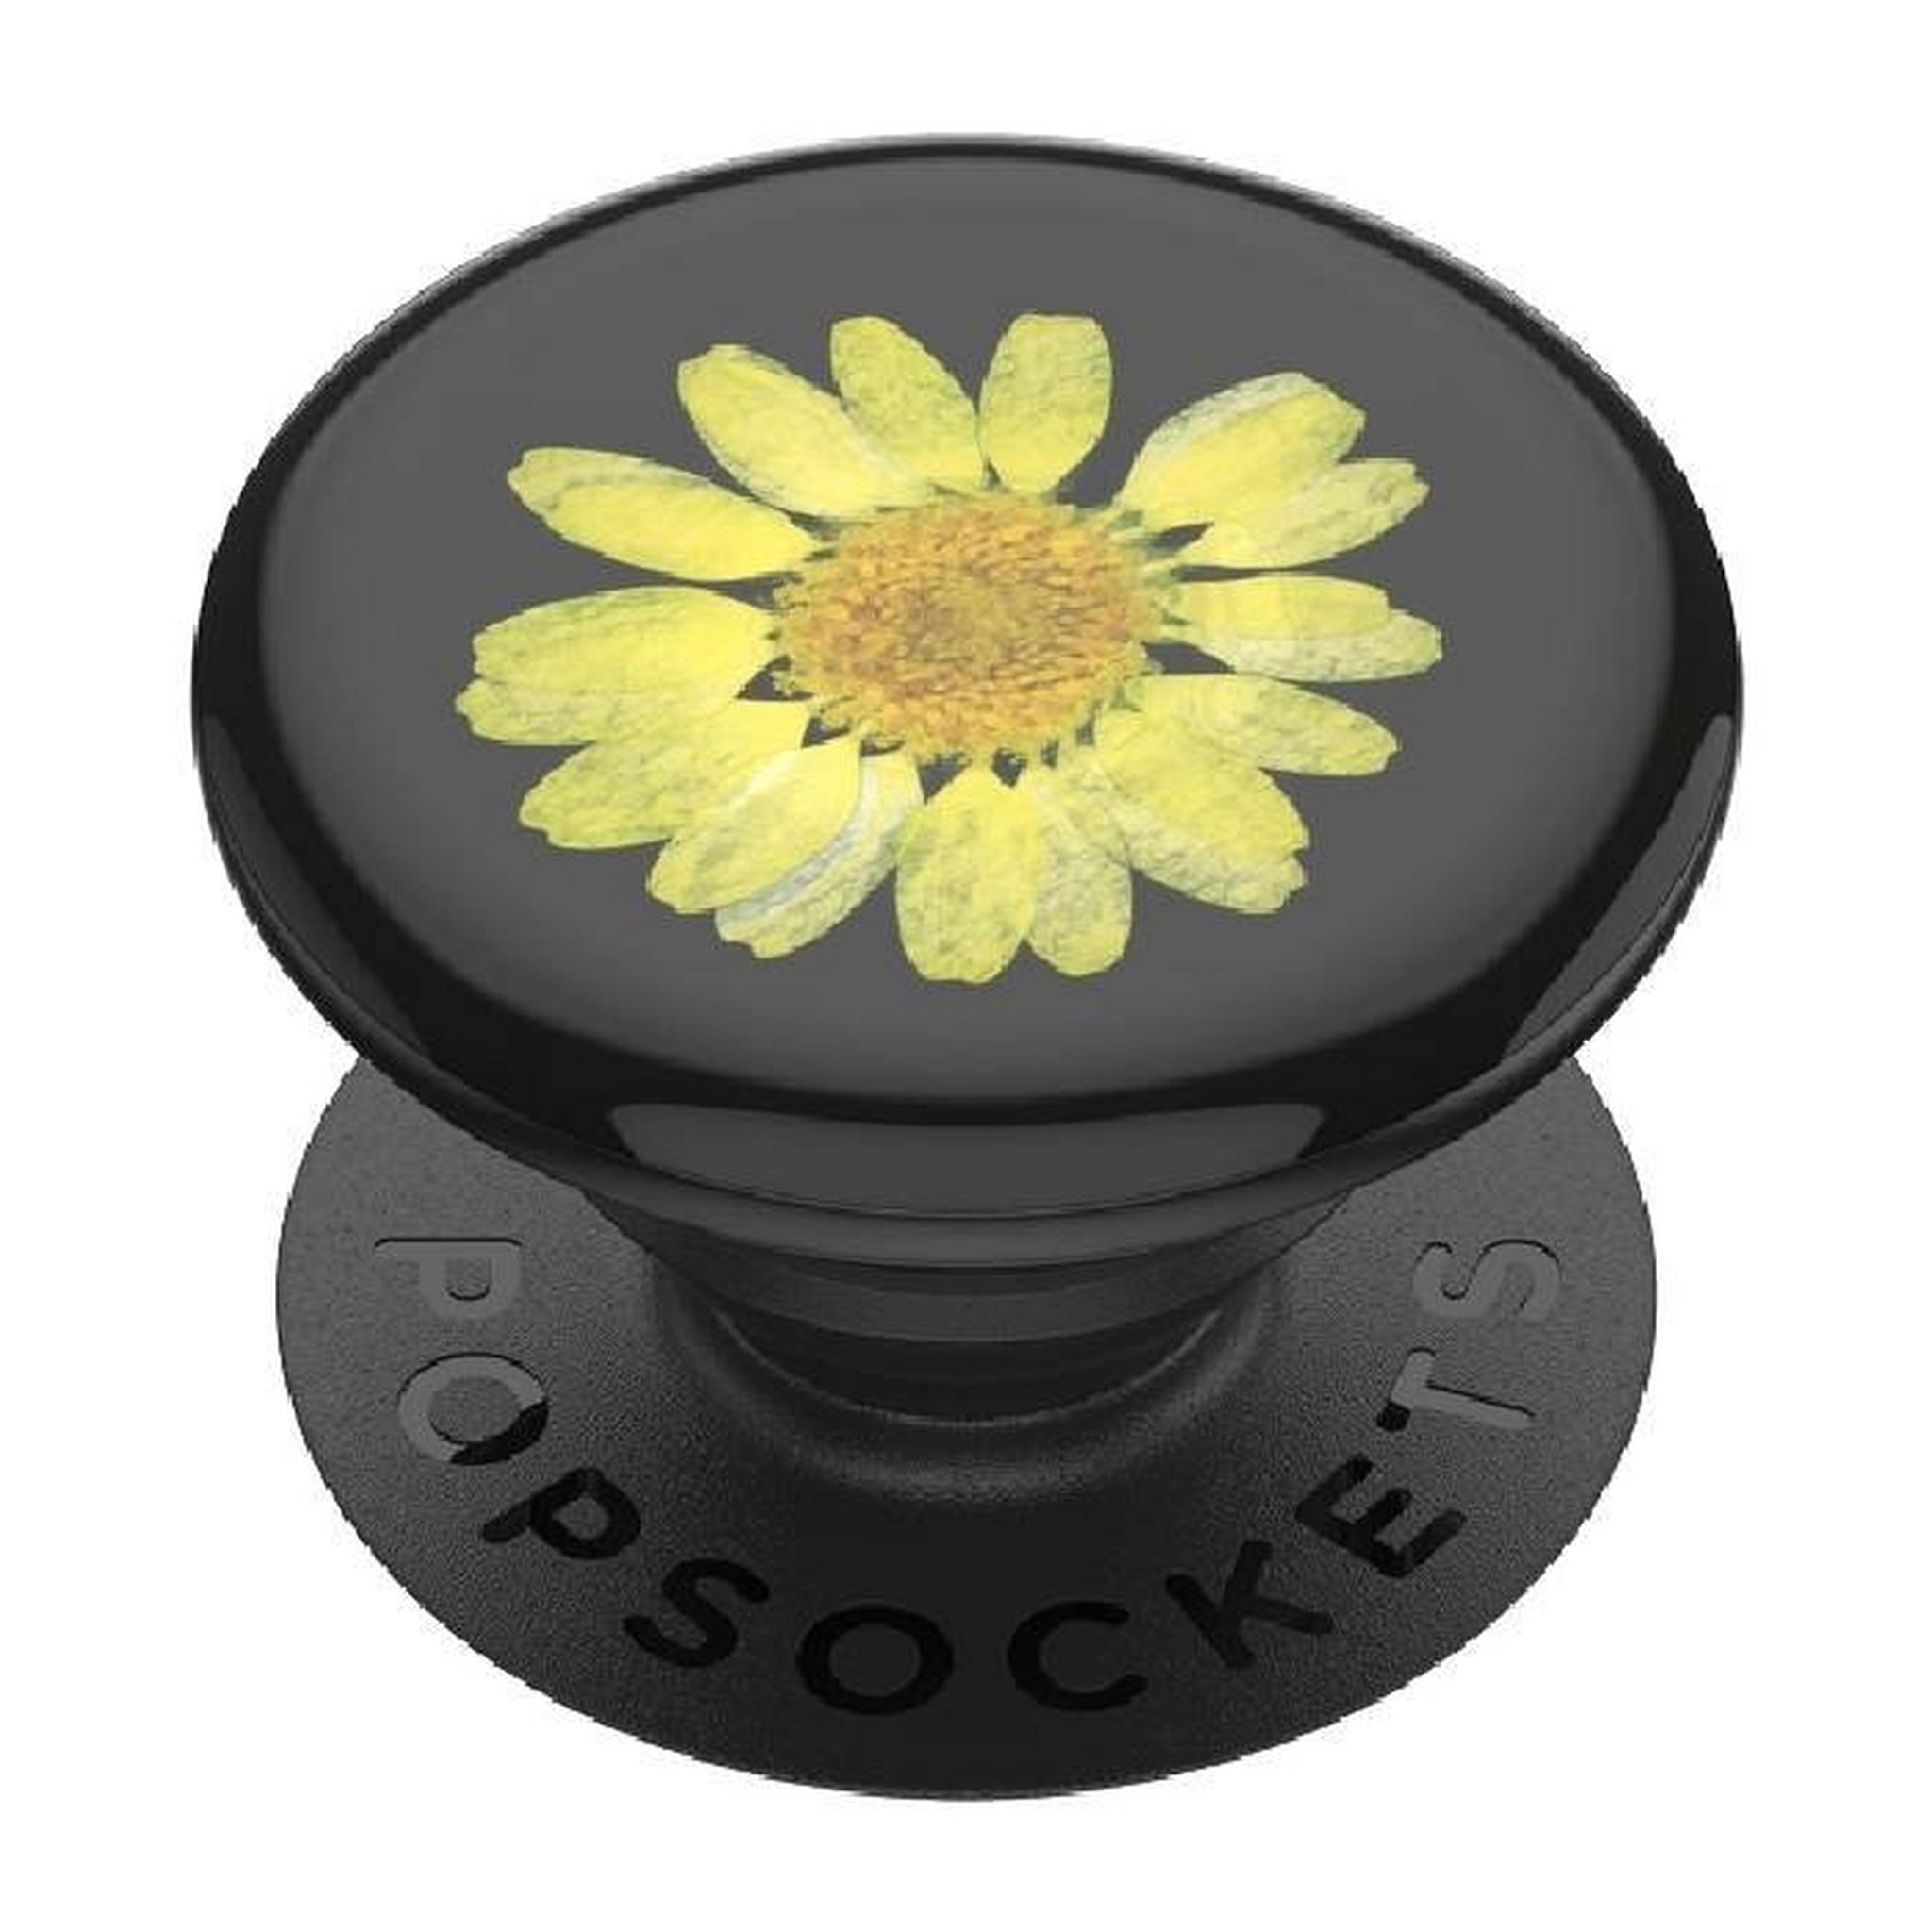 PopSockets Phone Stand and Grip (802999) – Pressed Flower Yellow Daisy